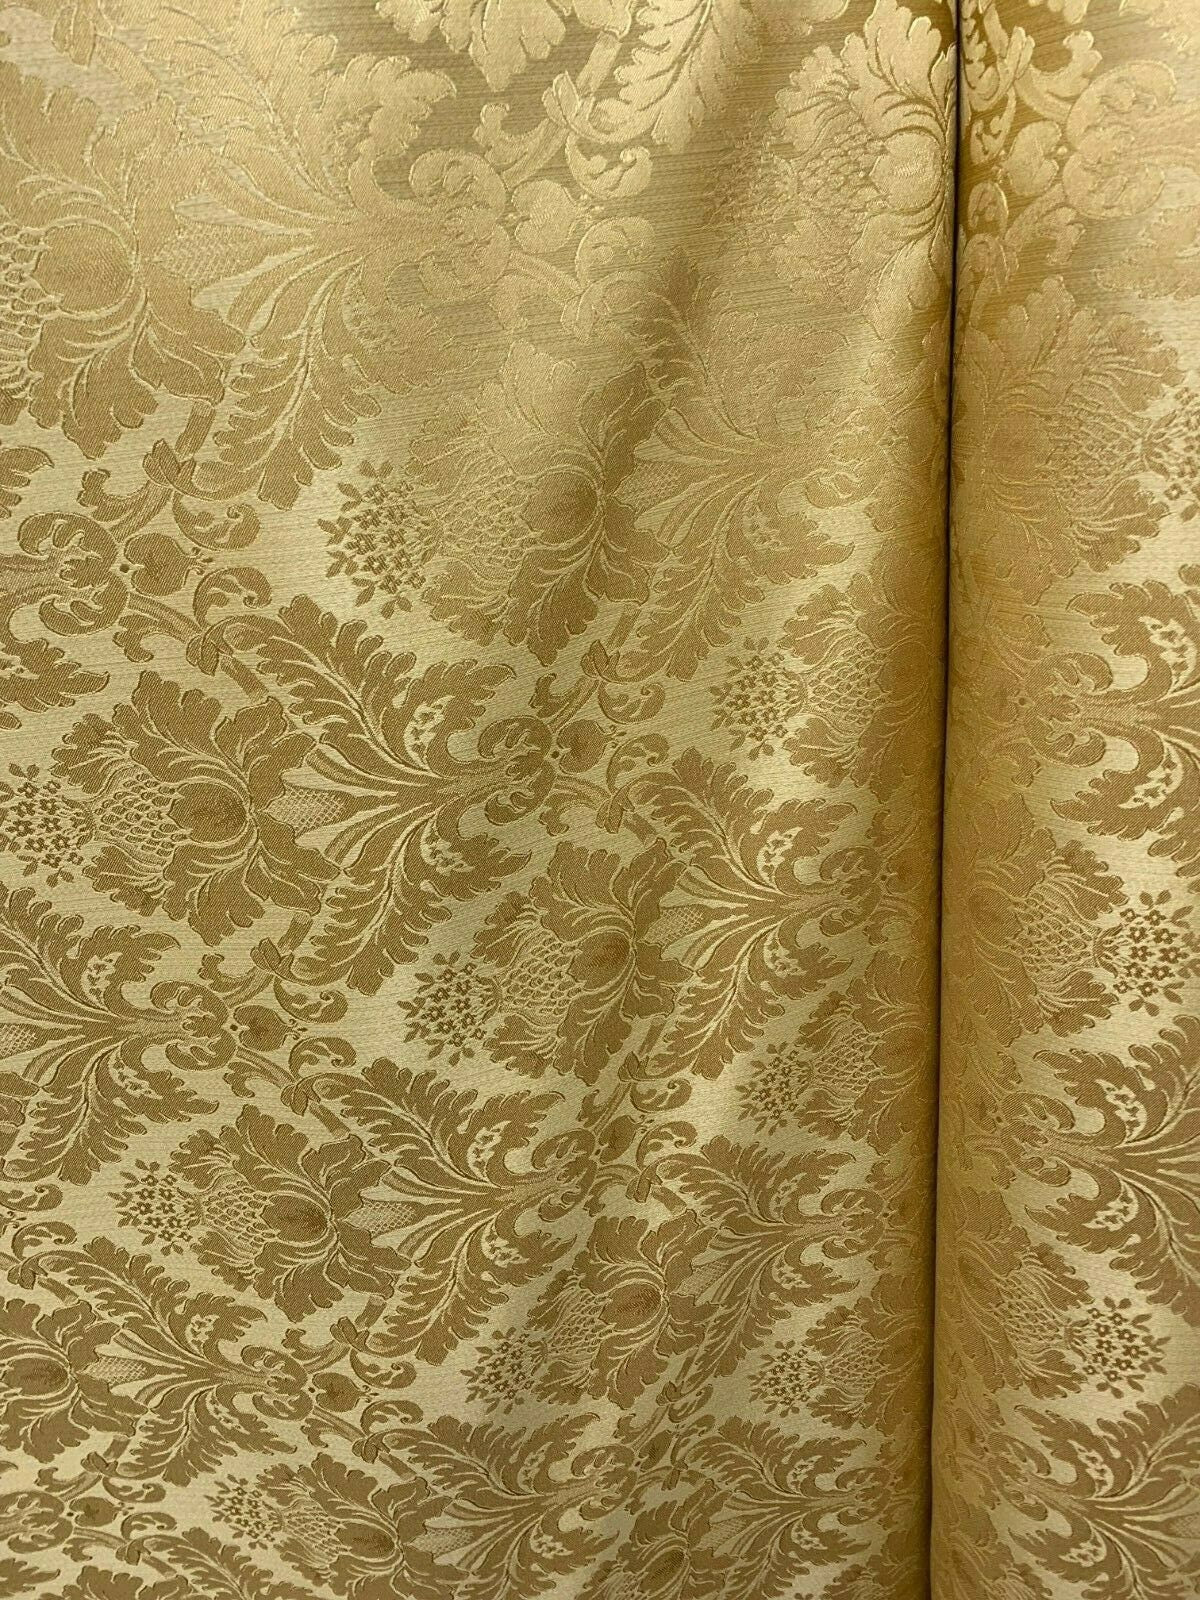 GOLD Damask Jacquard Brocade Flower Floral Fabric (110 in.) Sold By The Yard